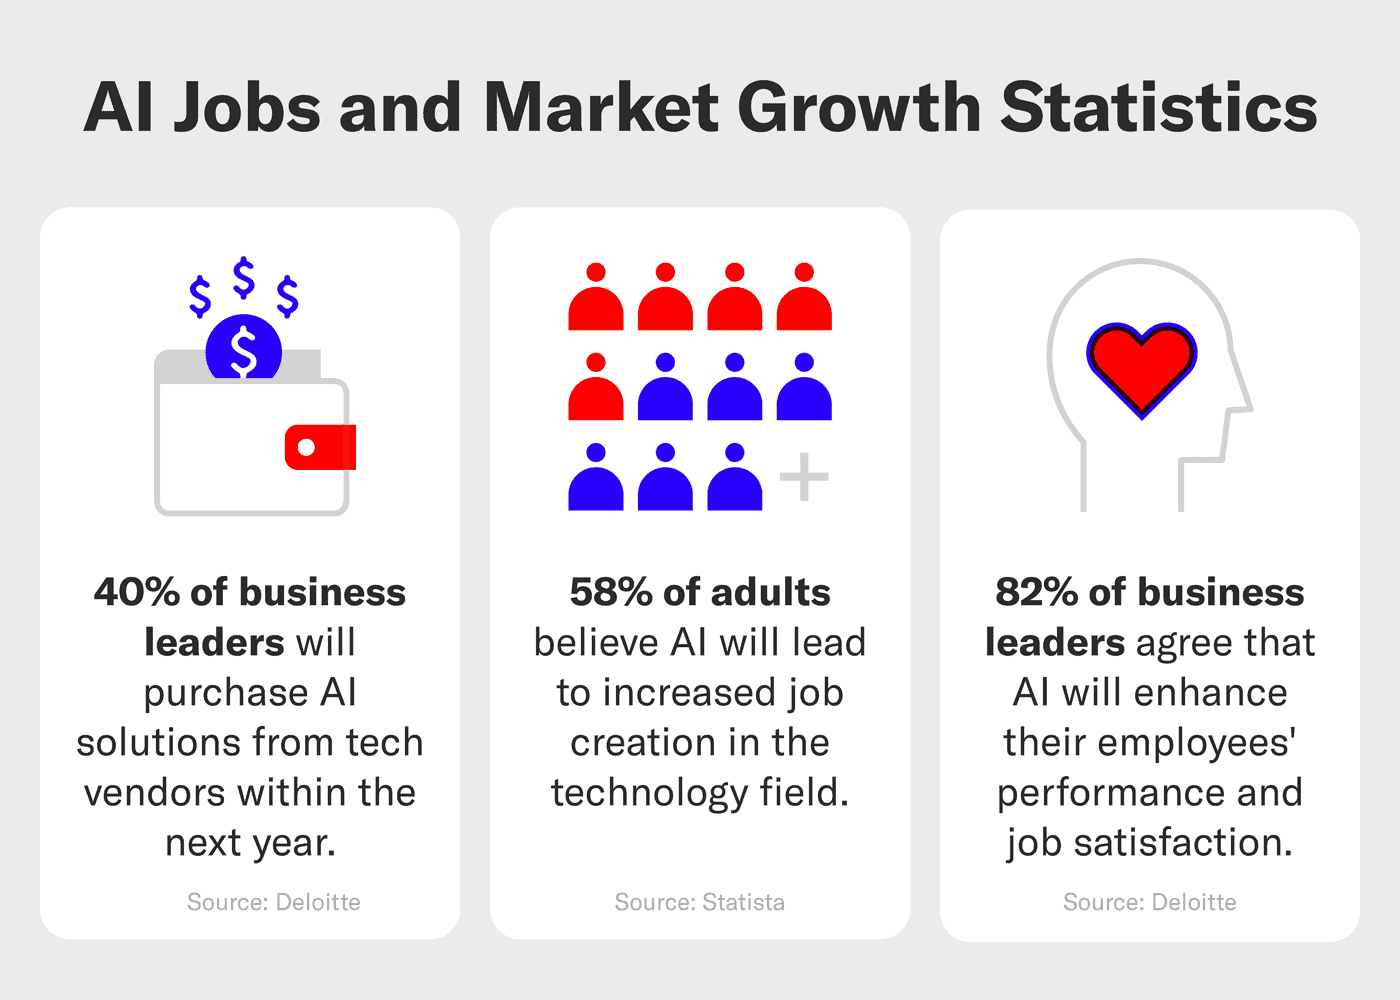 An image that shows statistics on AI jobs and market growth